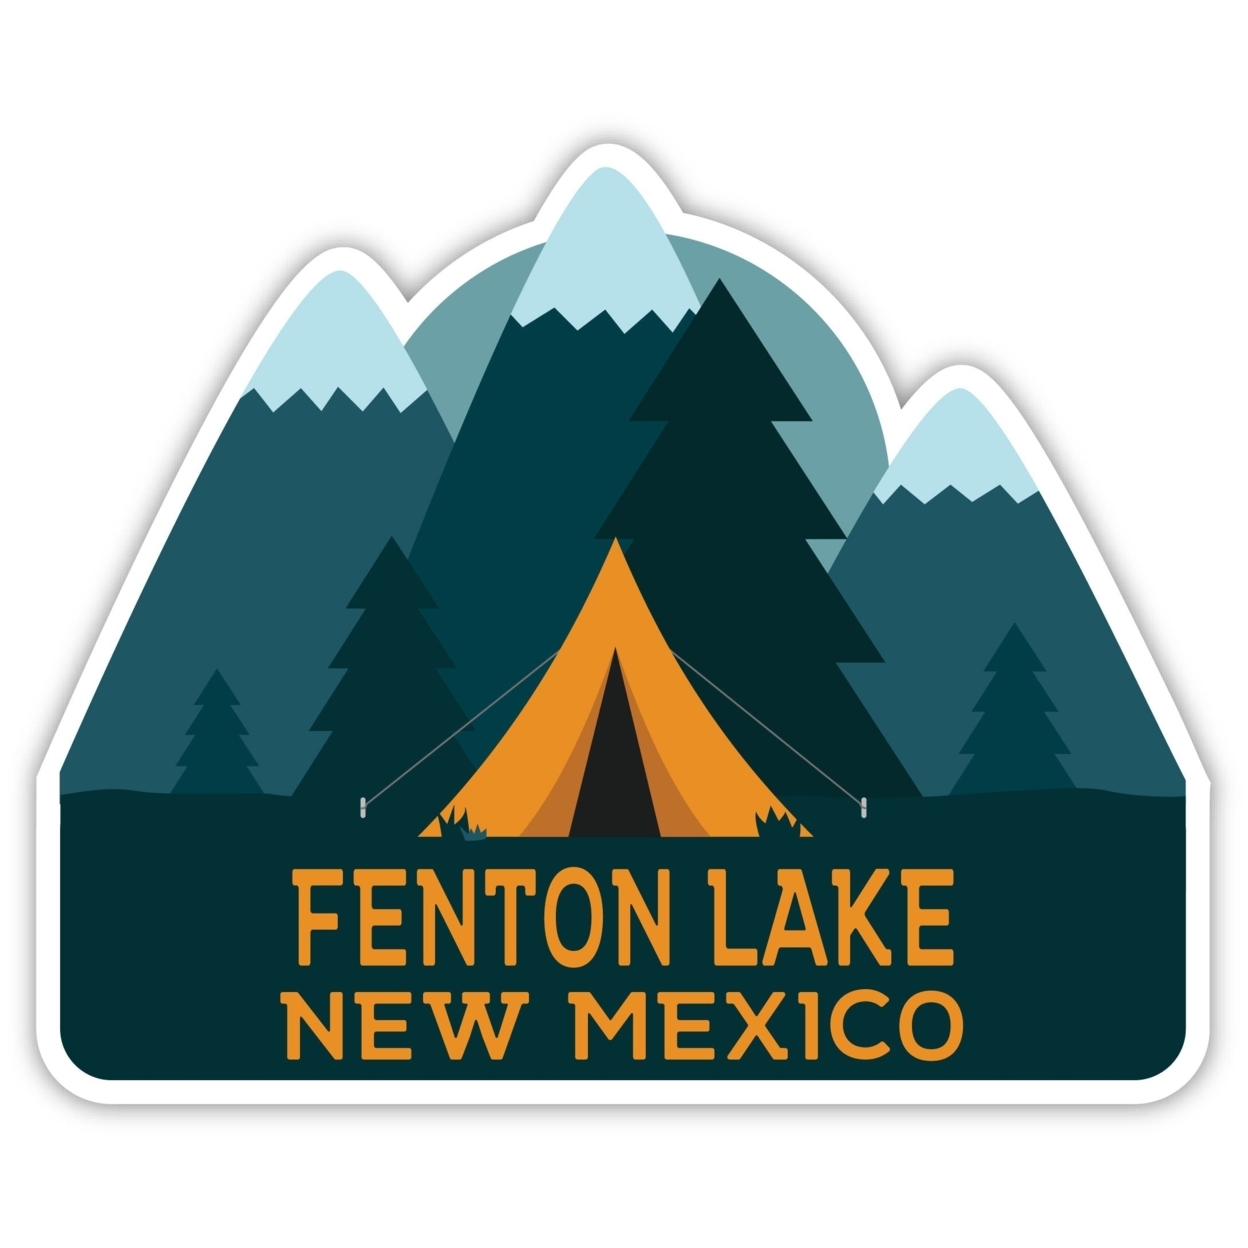 Fenton Lake New Mexico Souvenir Decorative Stickers (Choose Theme And Size) - 4-Pack, 10-Inch, Tent